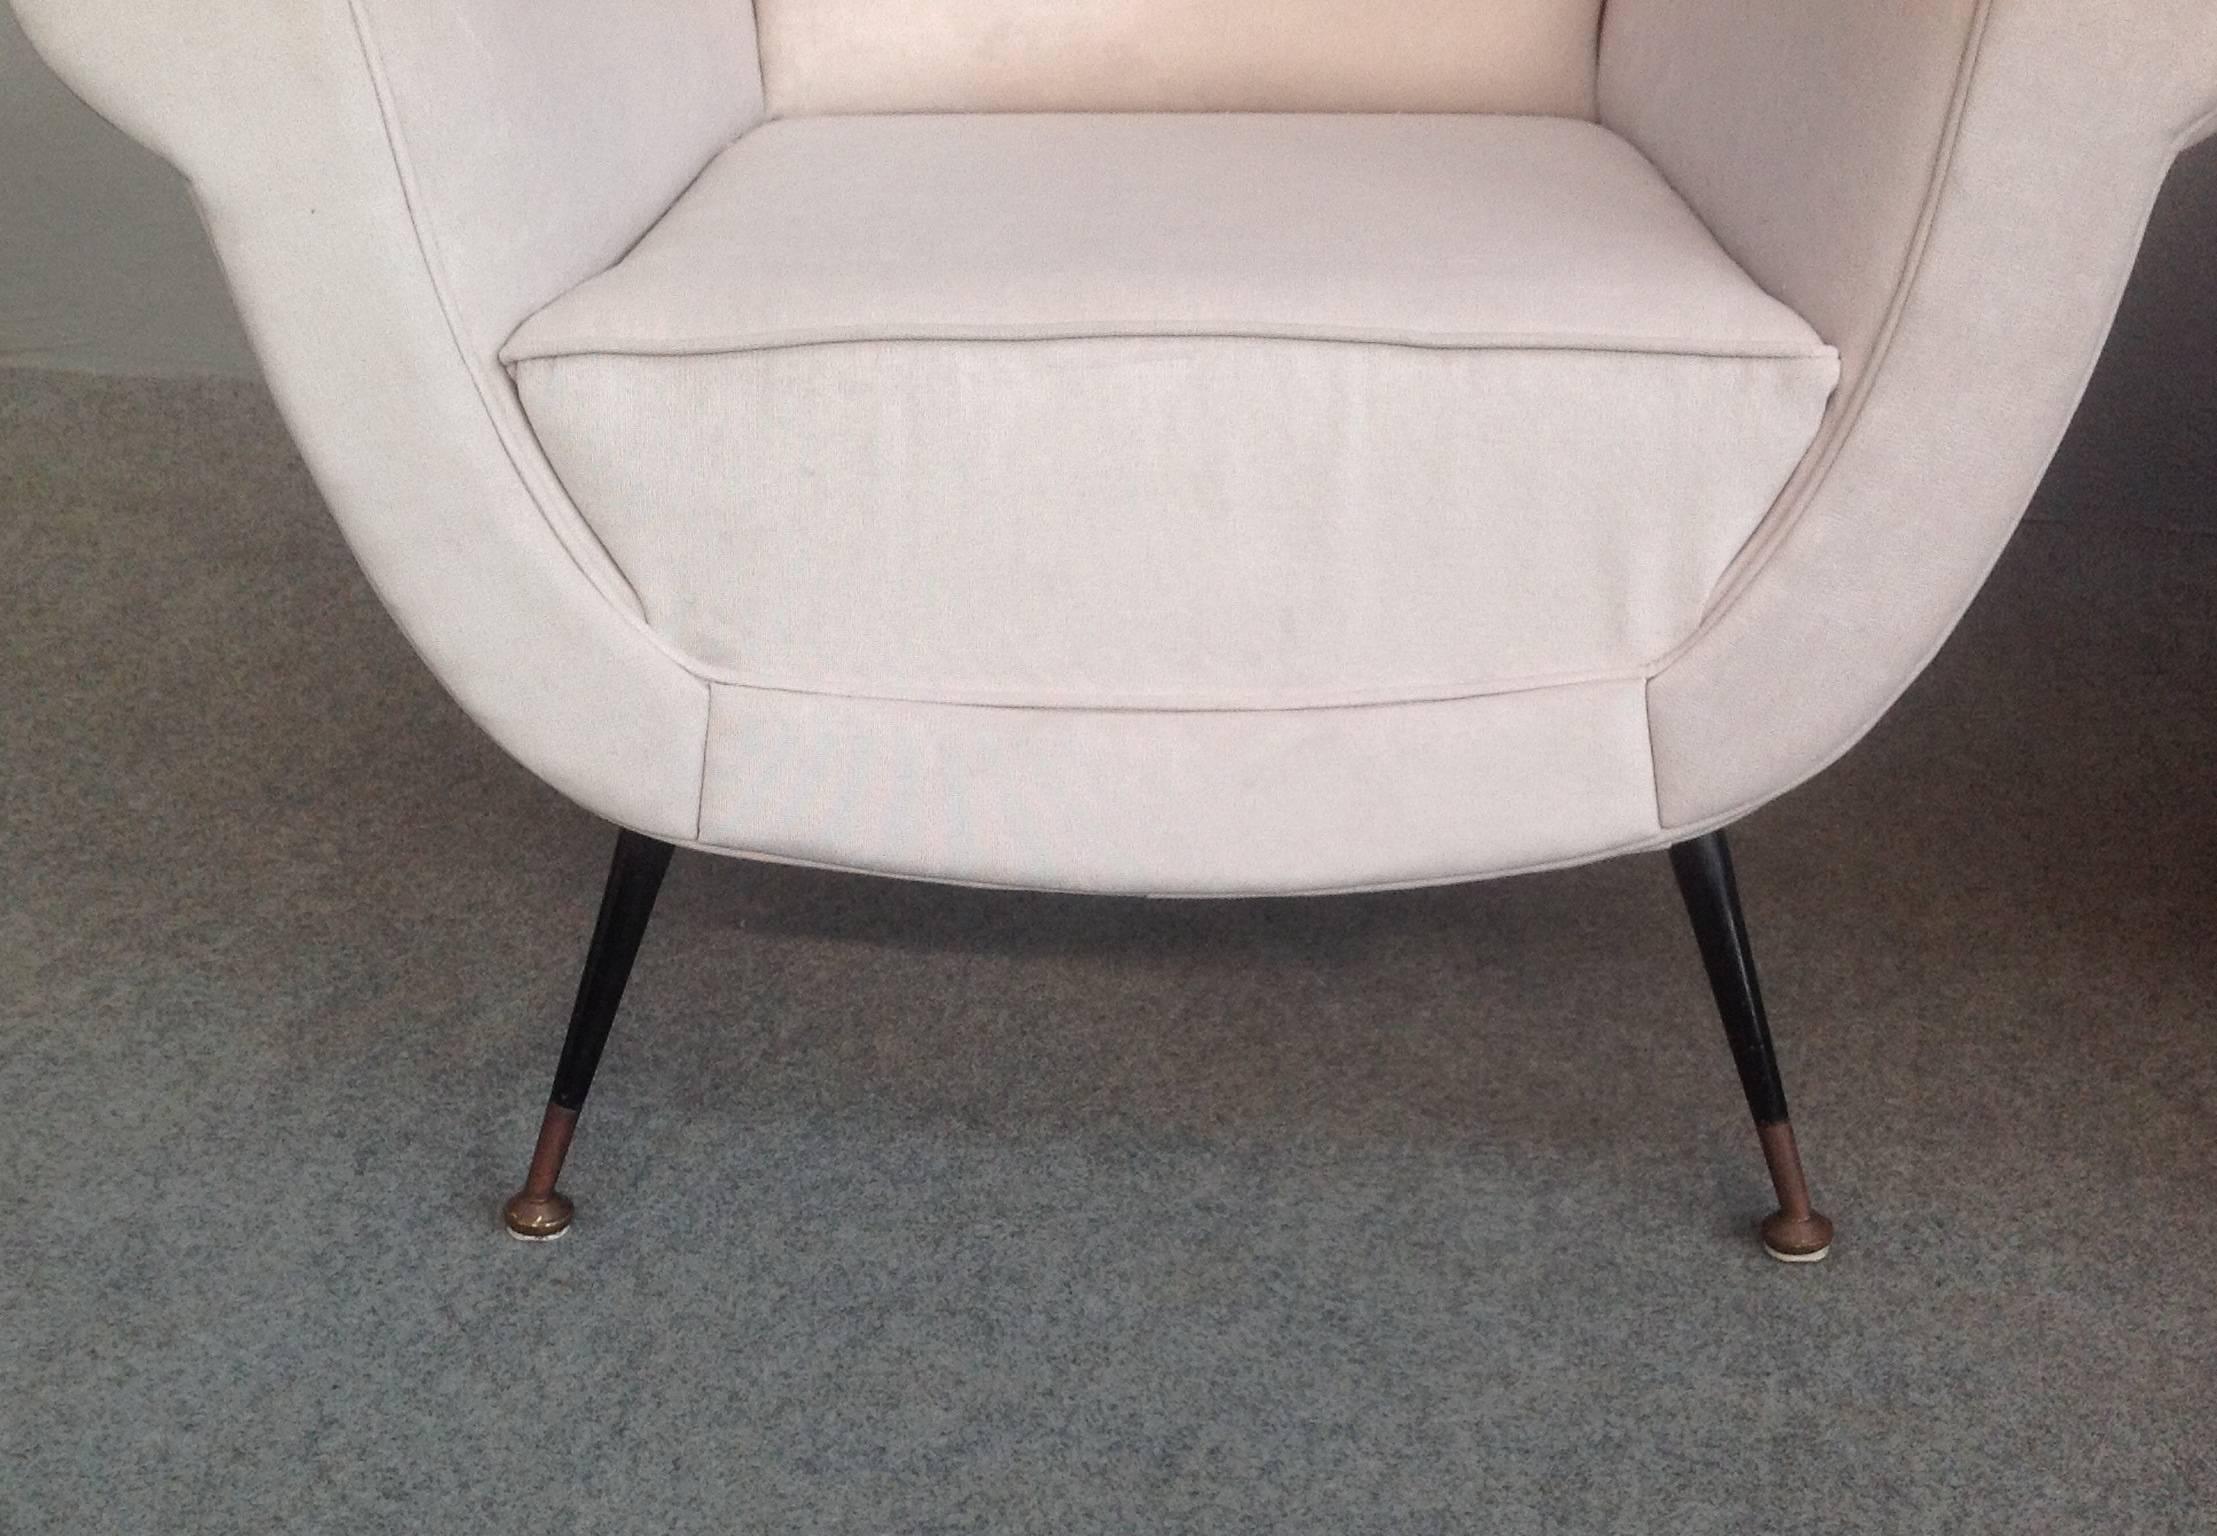 Very nice and elegant armchairs, metal laquered legs with brass sabots.
Newly reupholstered in white cotton